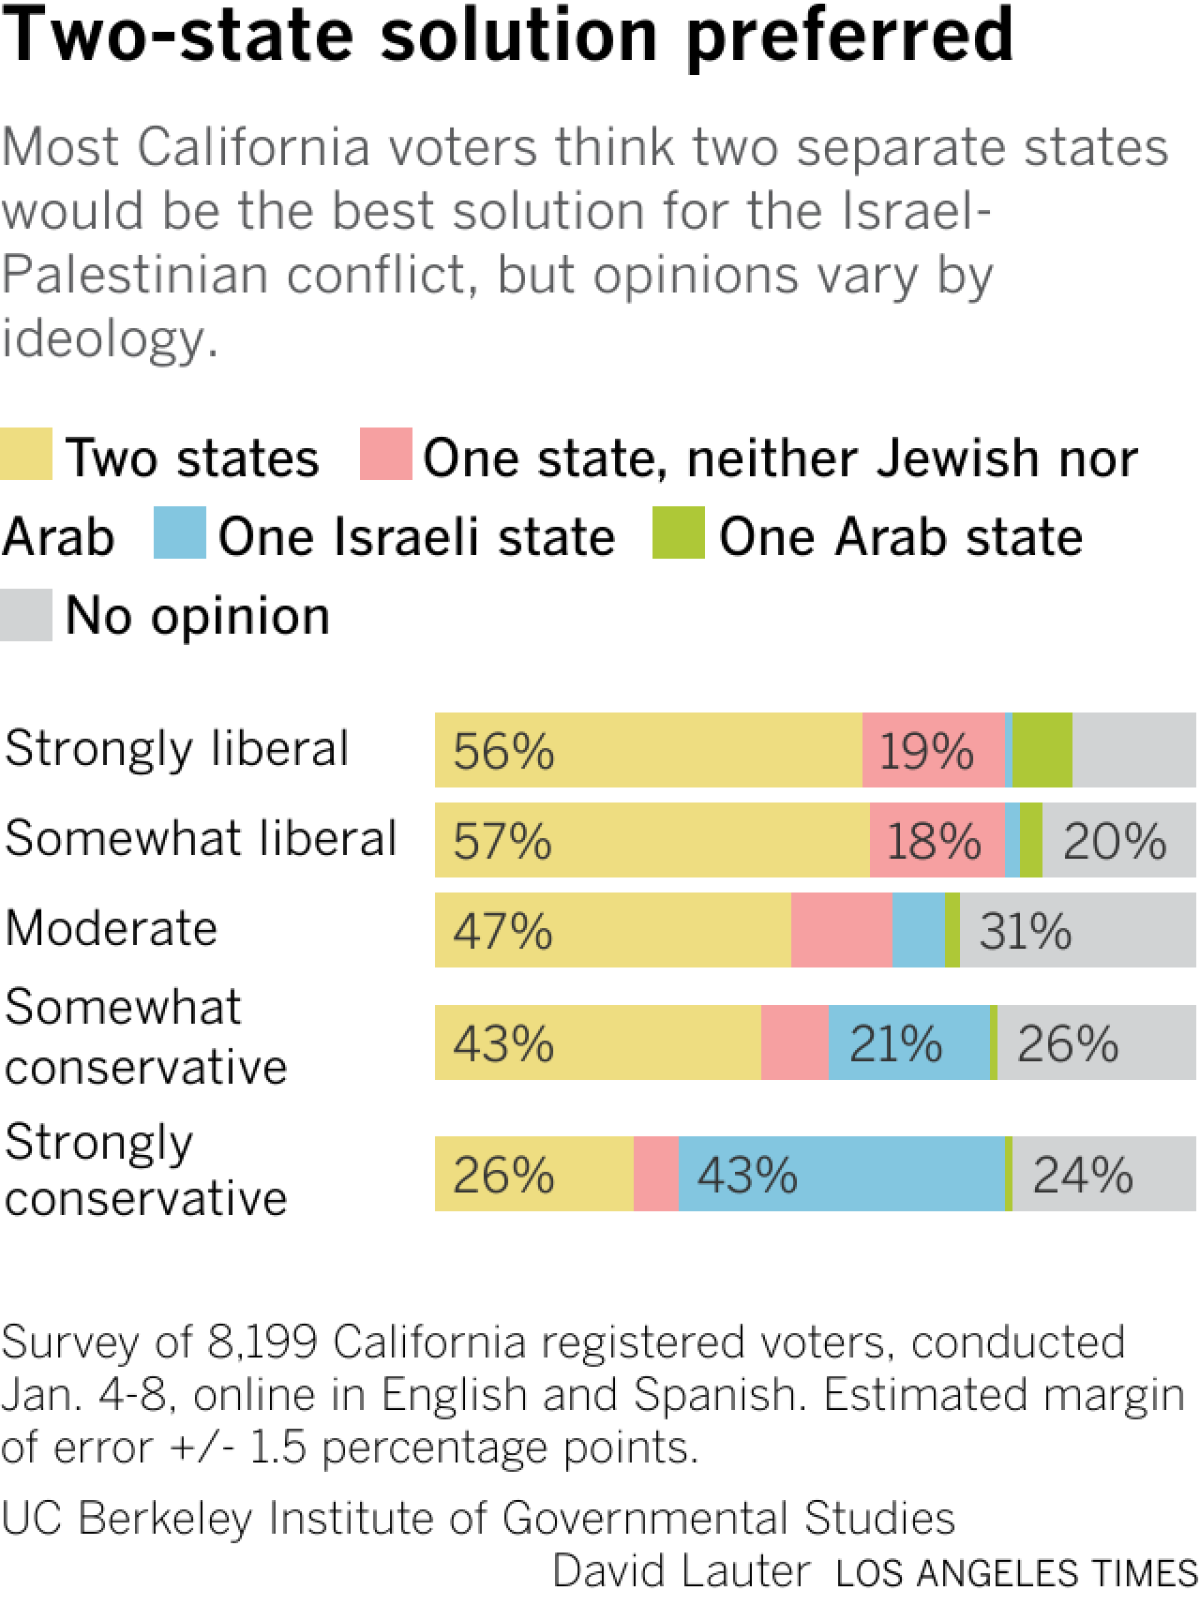 Most California voters think two separate states would be the best solution for the Israel-Palestinian conflict, but opinions vary by ideology.